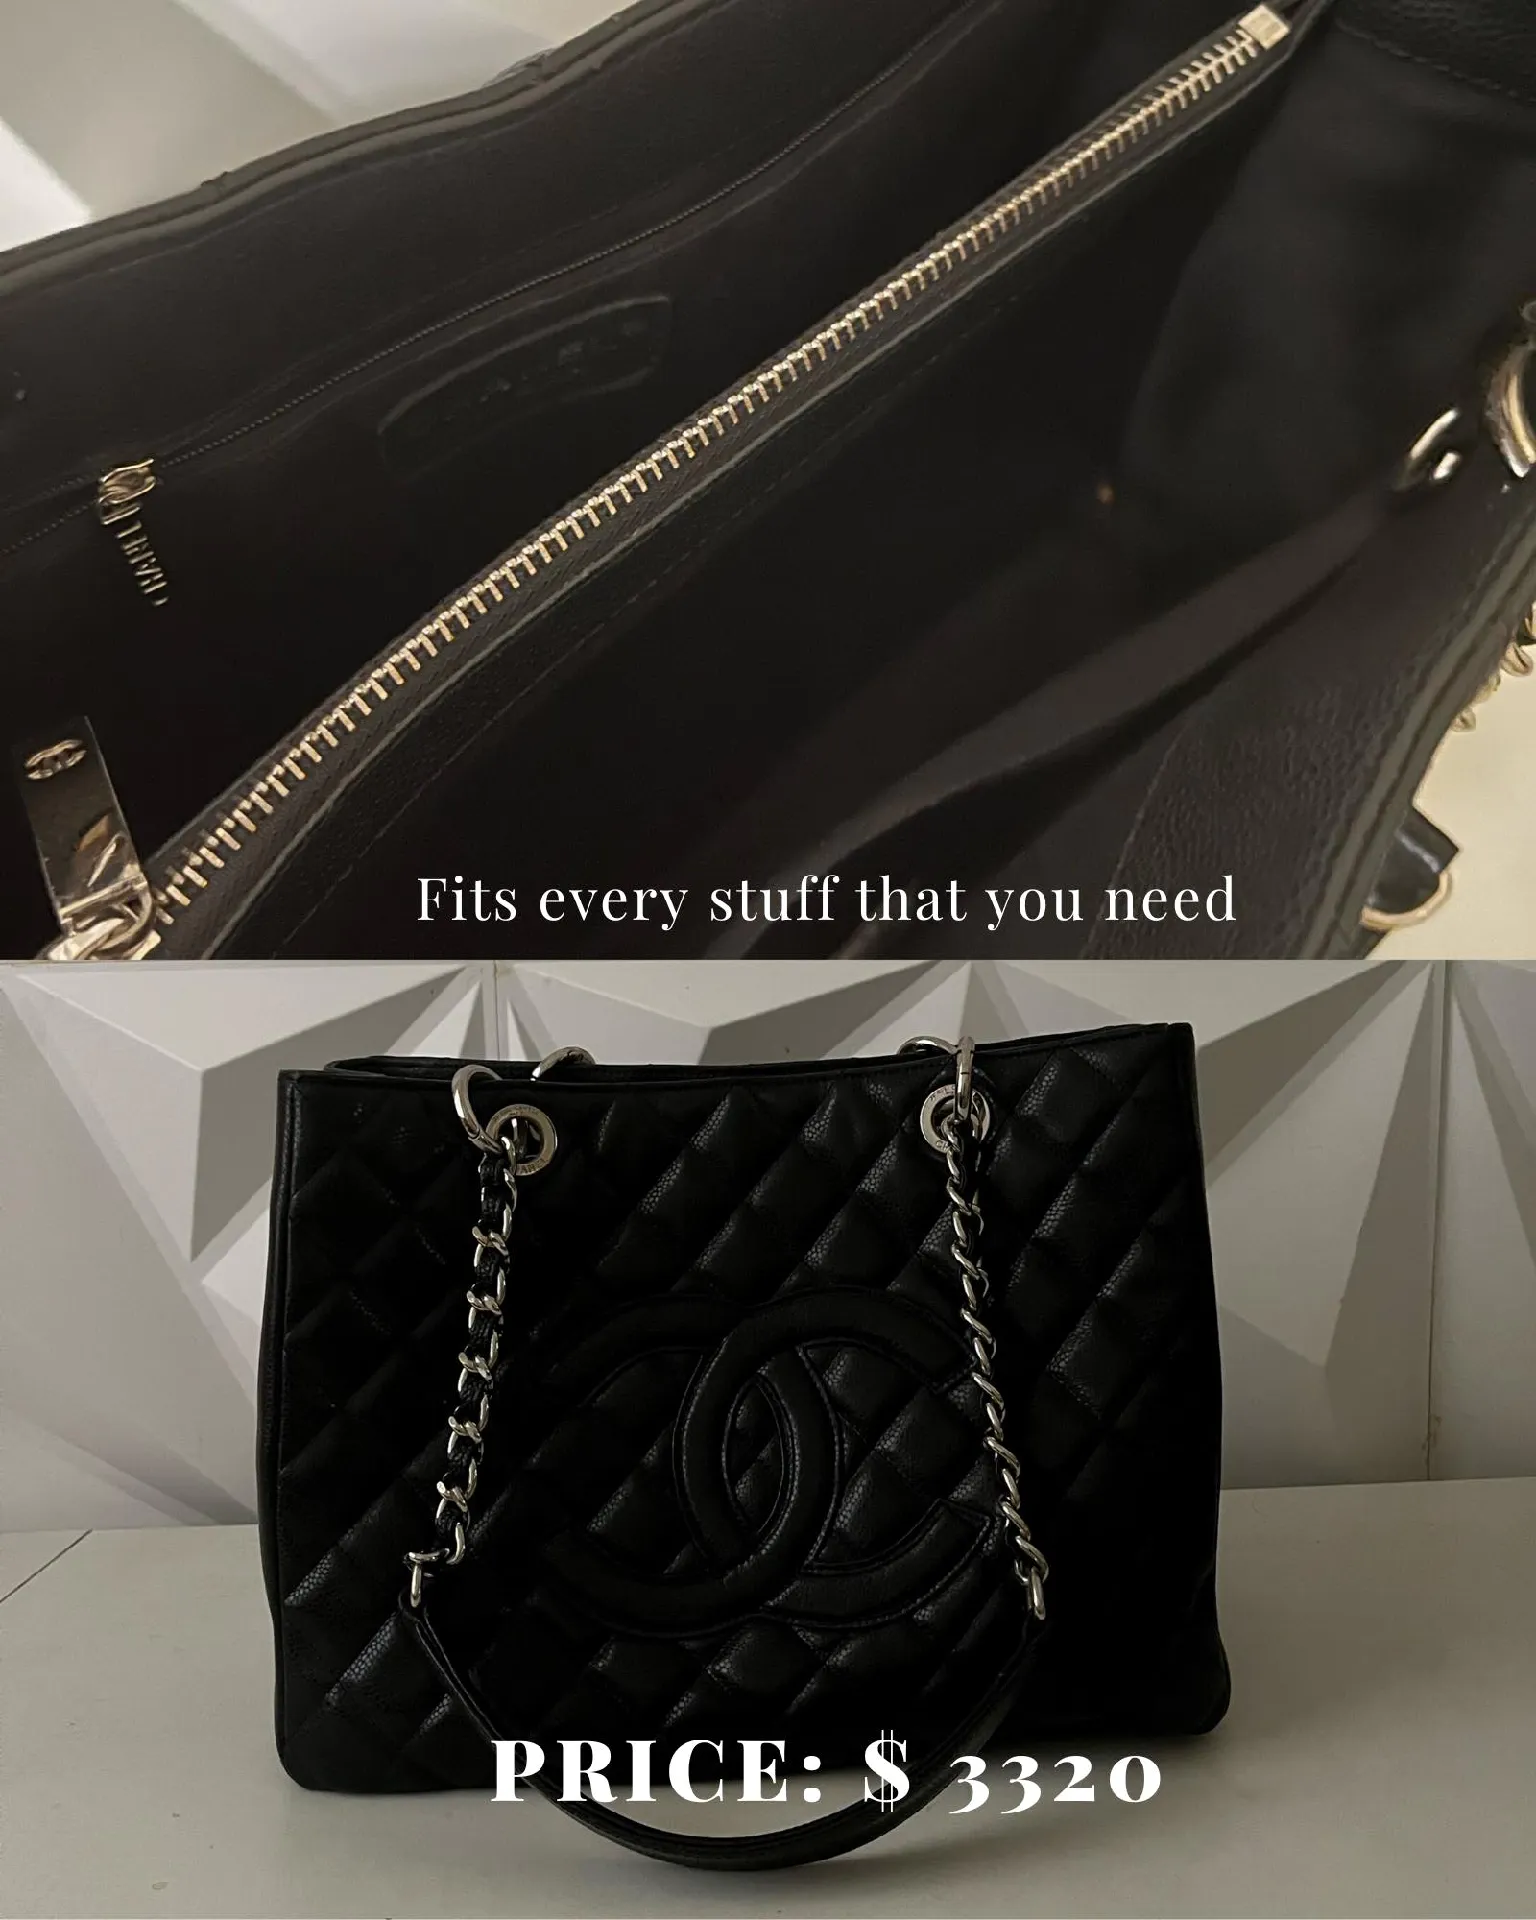 Chanel Chanel GST Pink Quilted Caviar Leather Large Grand Shopping